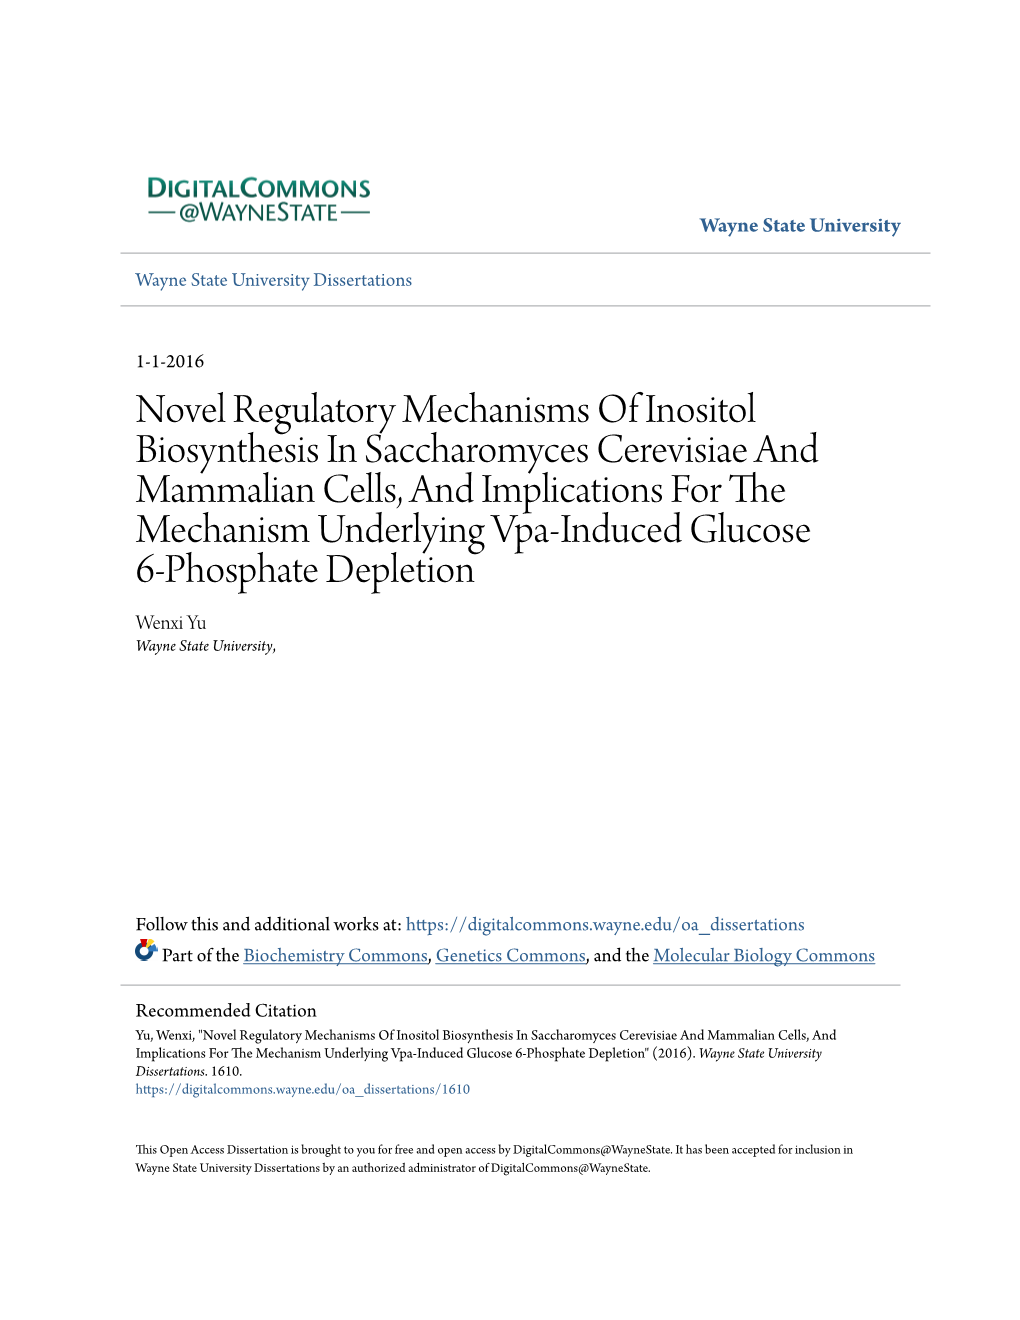 Novel Regulatory Mechanisms of Inositol Biosynthesis in Saccharomyces Cerevisiae and Mammalian Cells, and Implications for the M